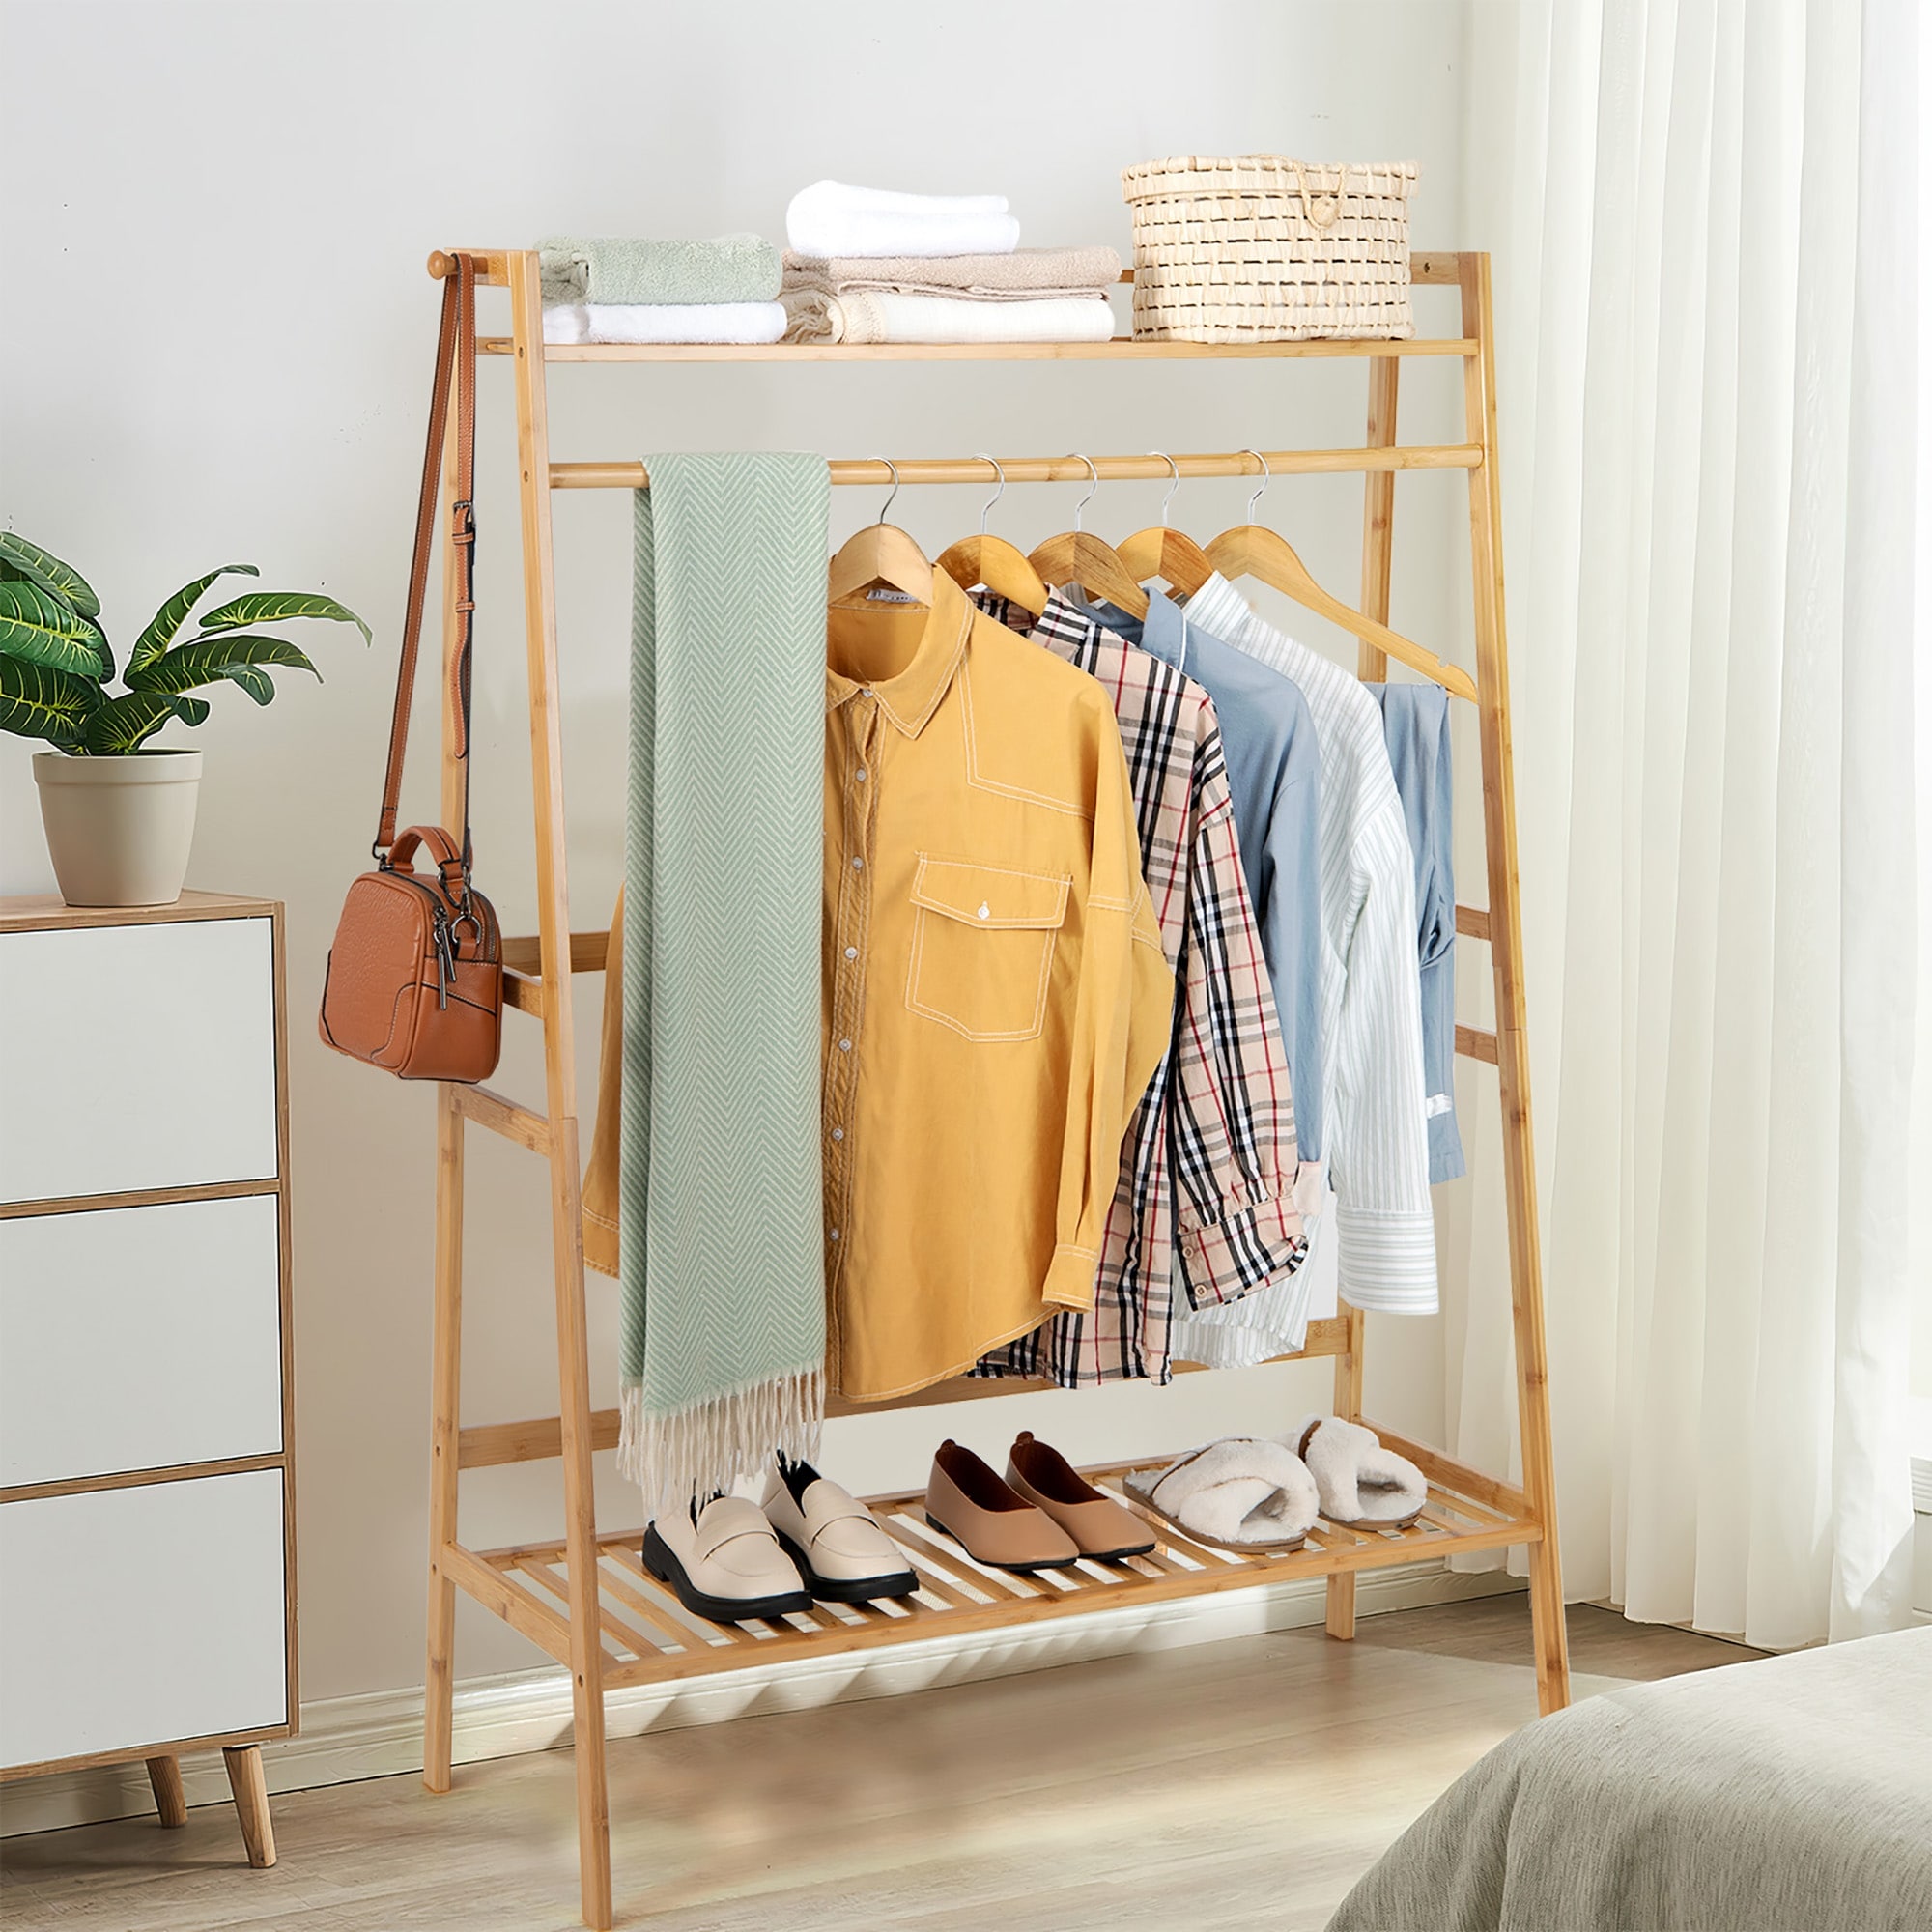 https://ak1.ostkcdn.com/images/products/is/images/direct/66f541a9cf46523e7c46930011a938256e0416a7/3Tier-Bamboo-Clothing-Rack-Freestanding-Clothes-Organizer-with-Shelves.jpg